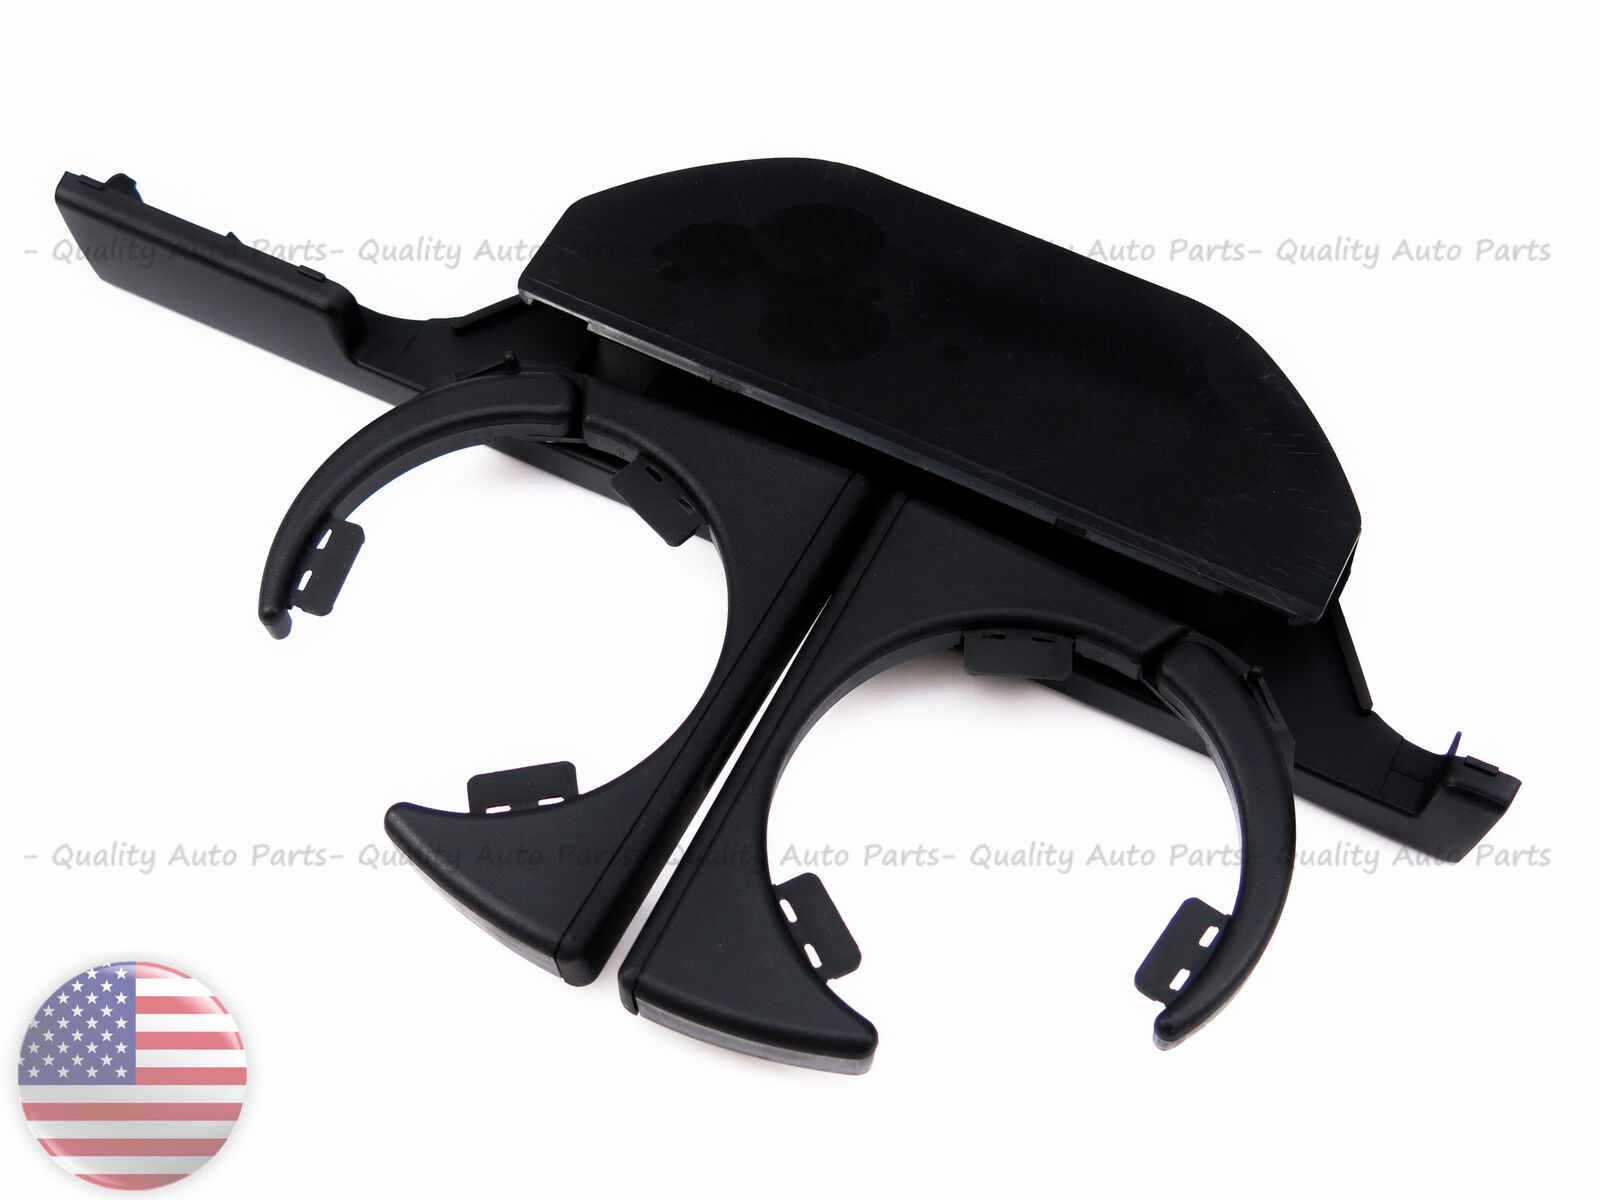 New For BMW E39 Console Front Cup Holder 525 528 530 540 M5 51168190205 LHD